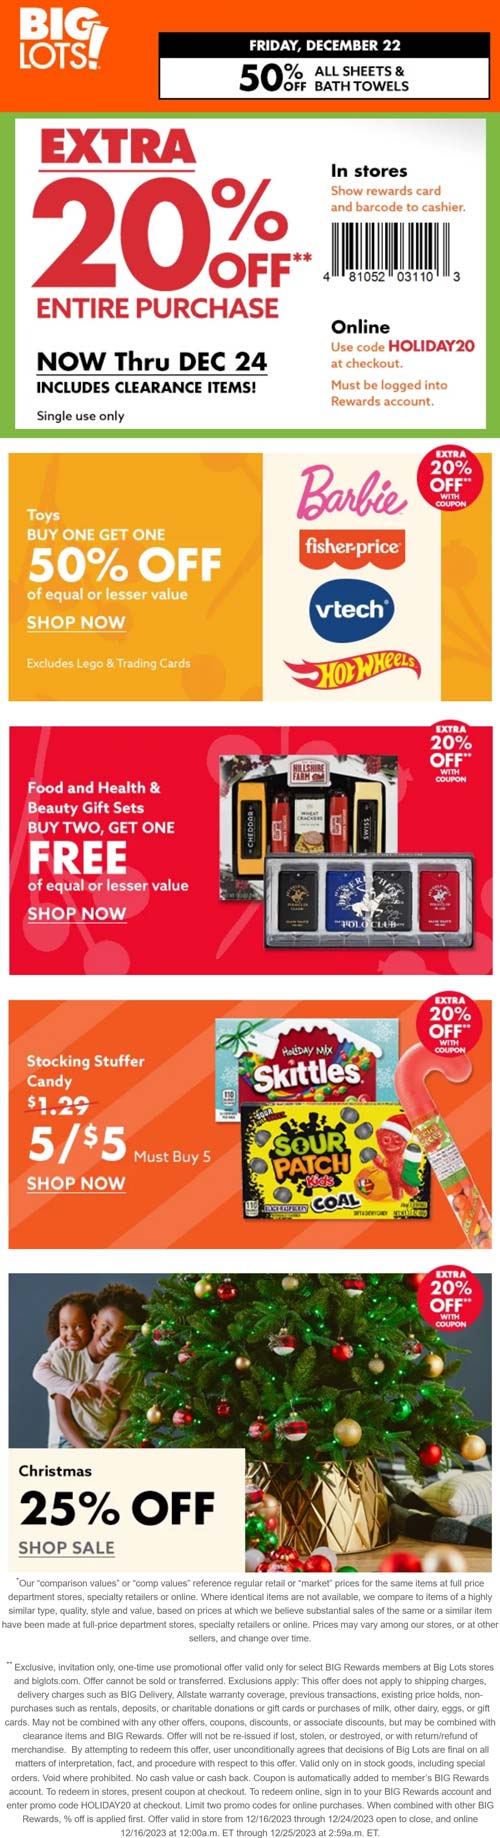 Big Lots stores Coupon  Extra 20% off everything at Big Lots, or online via promo code HOLIDAY20 #biglots 